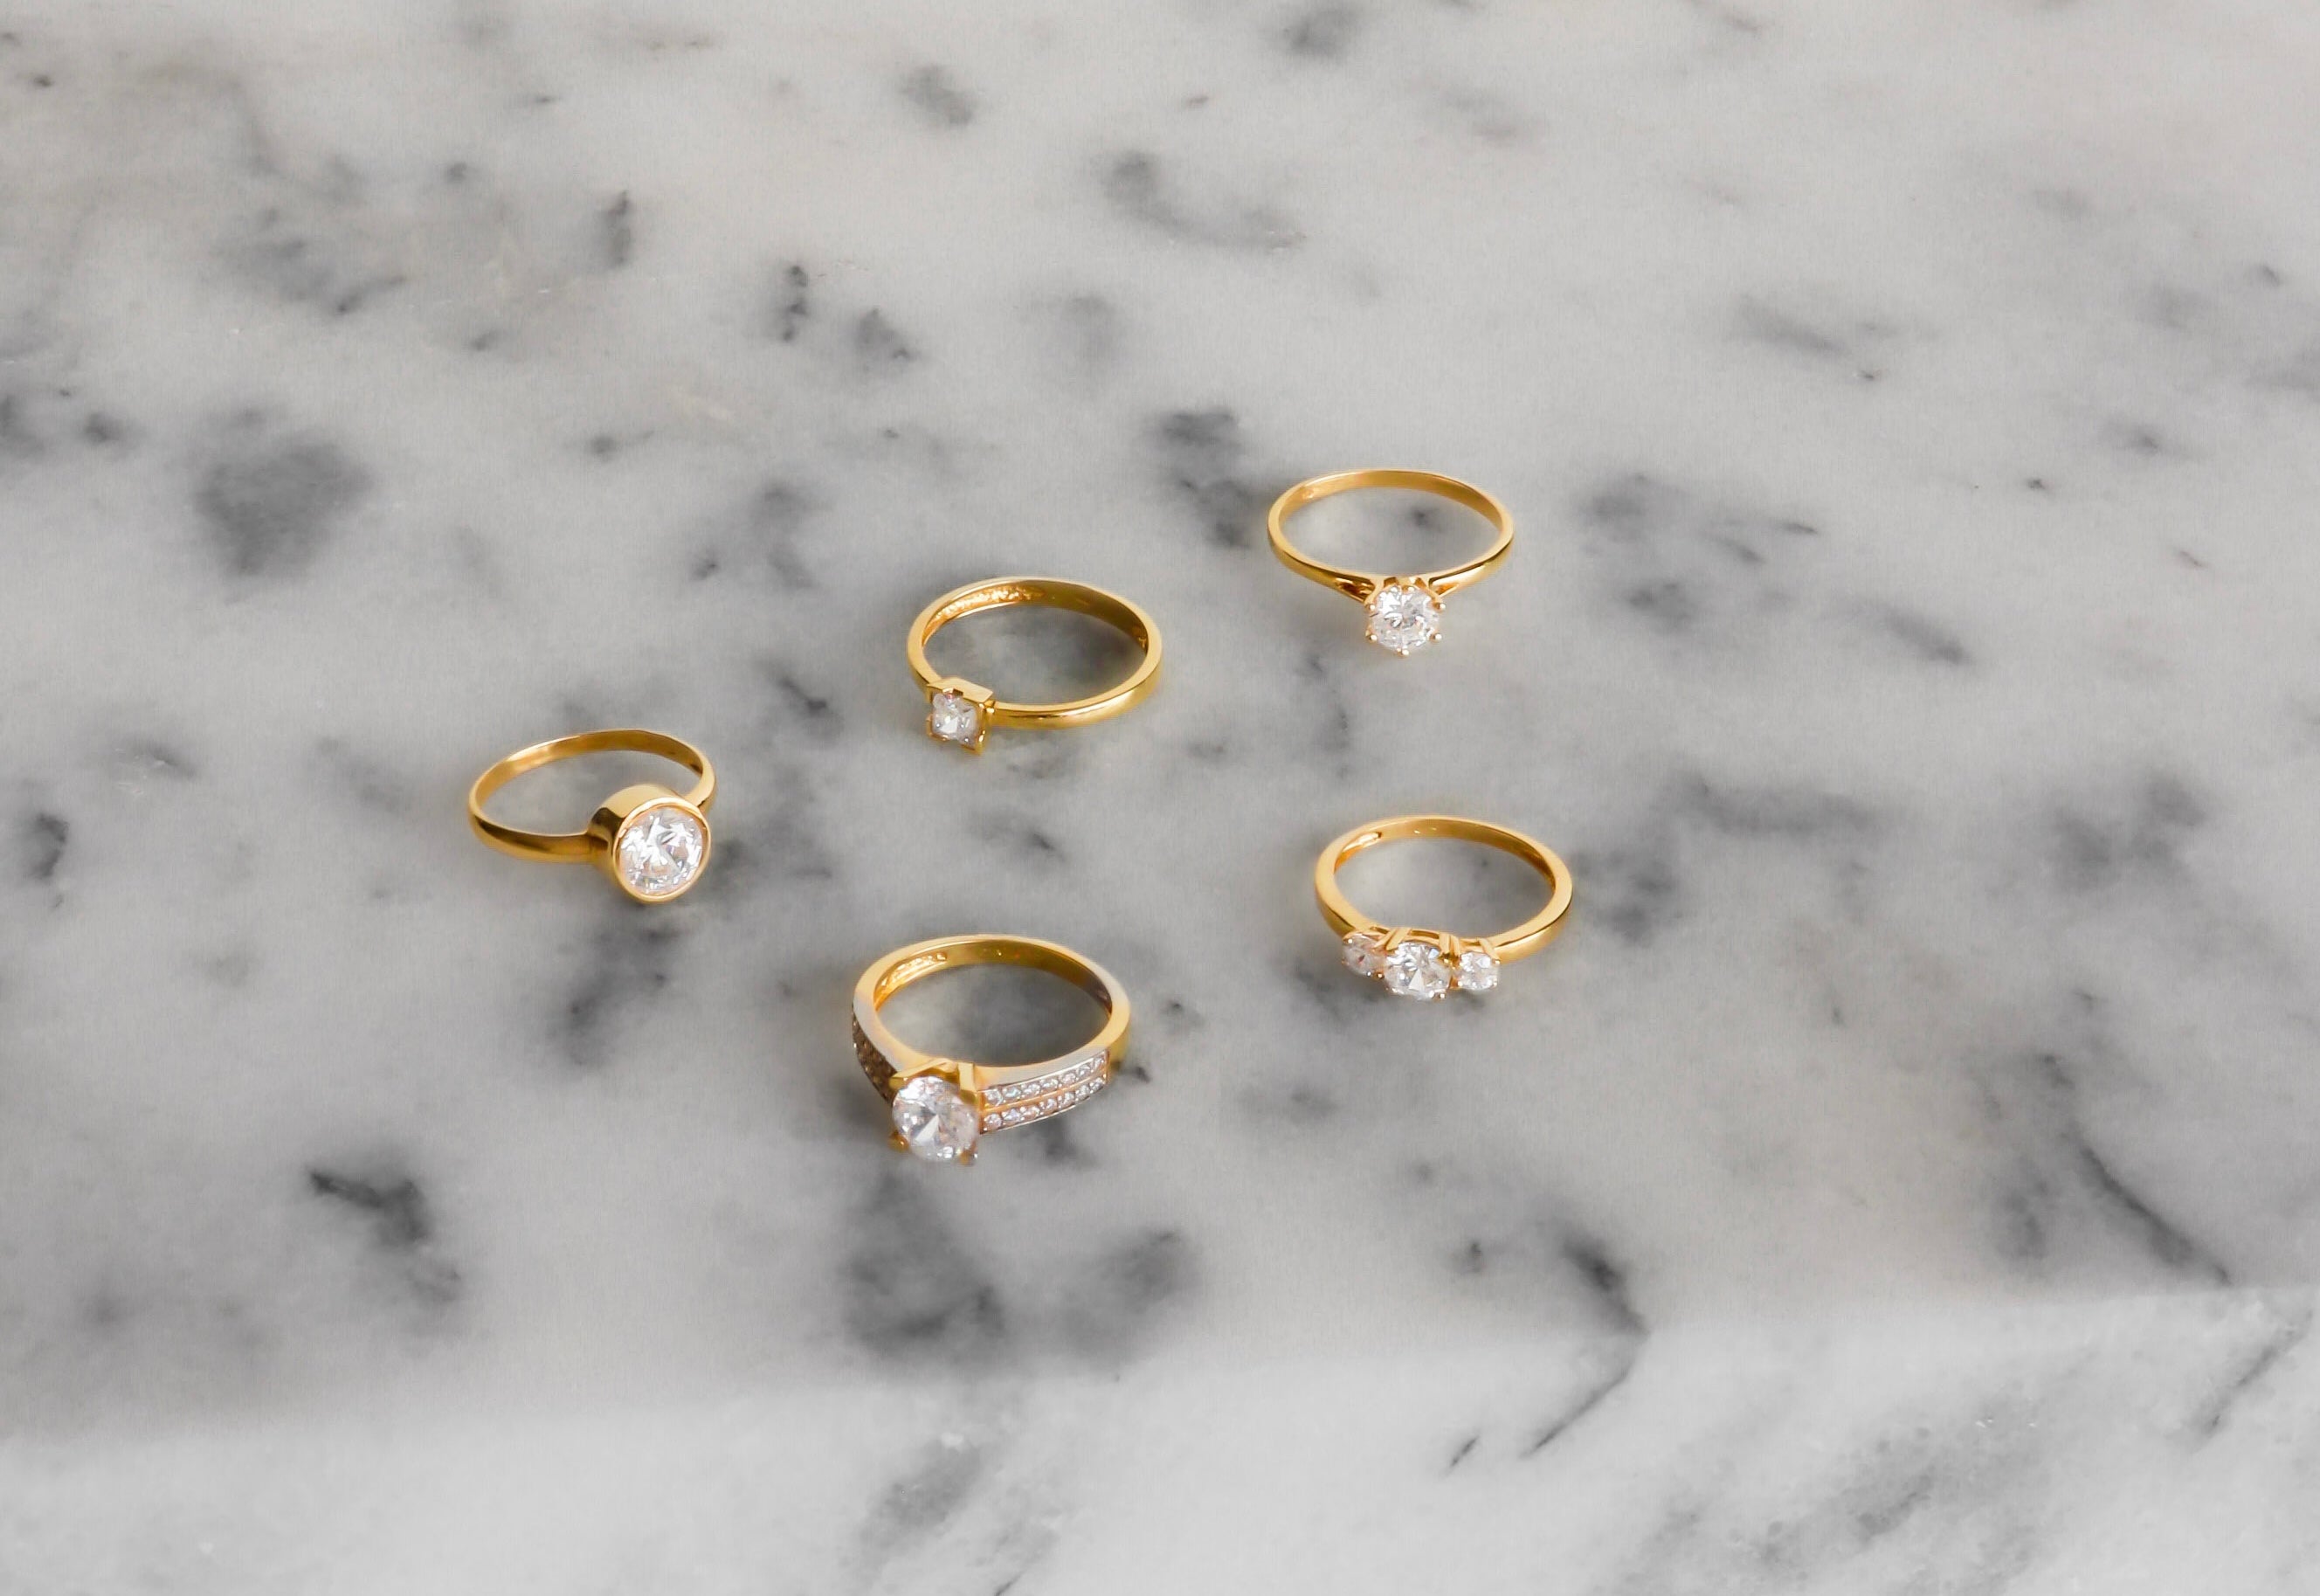 Captivating elegance with 5 essential pieces from Princess Jewellery adorned with zirconia